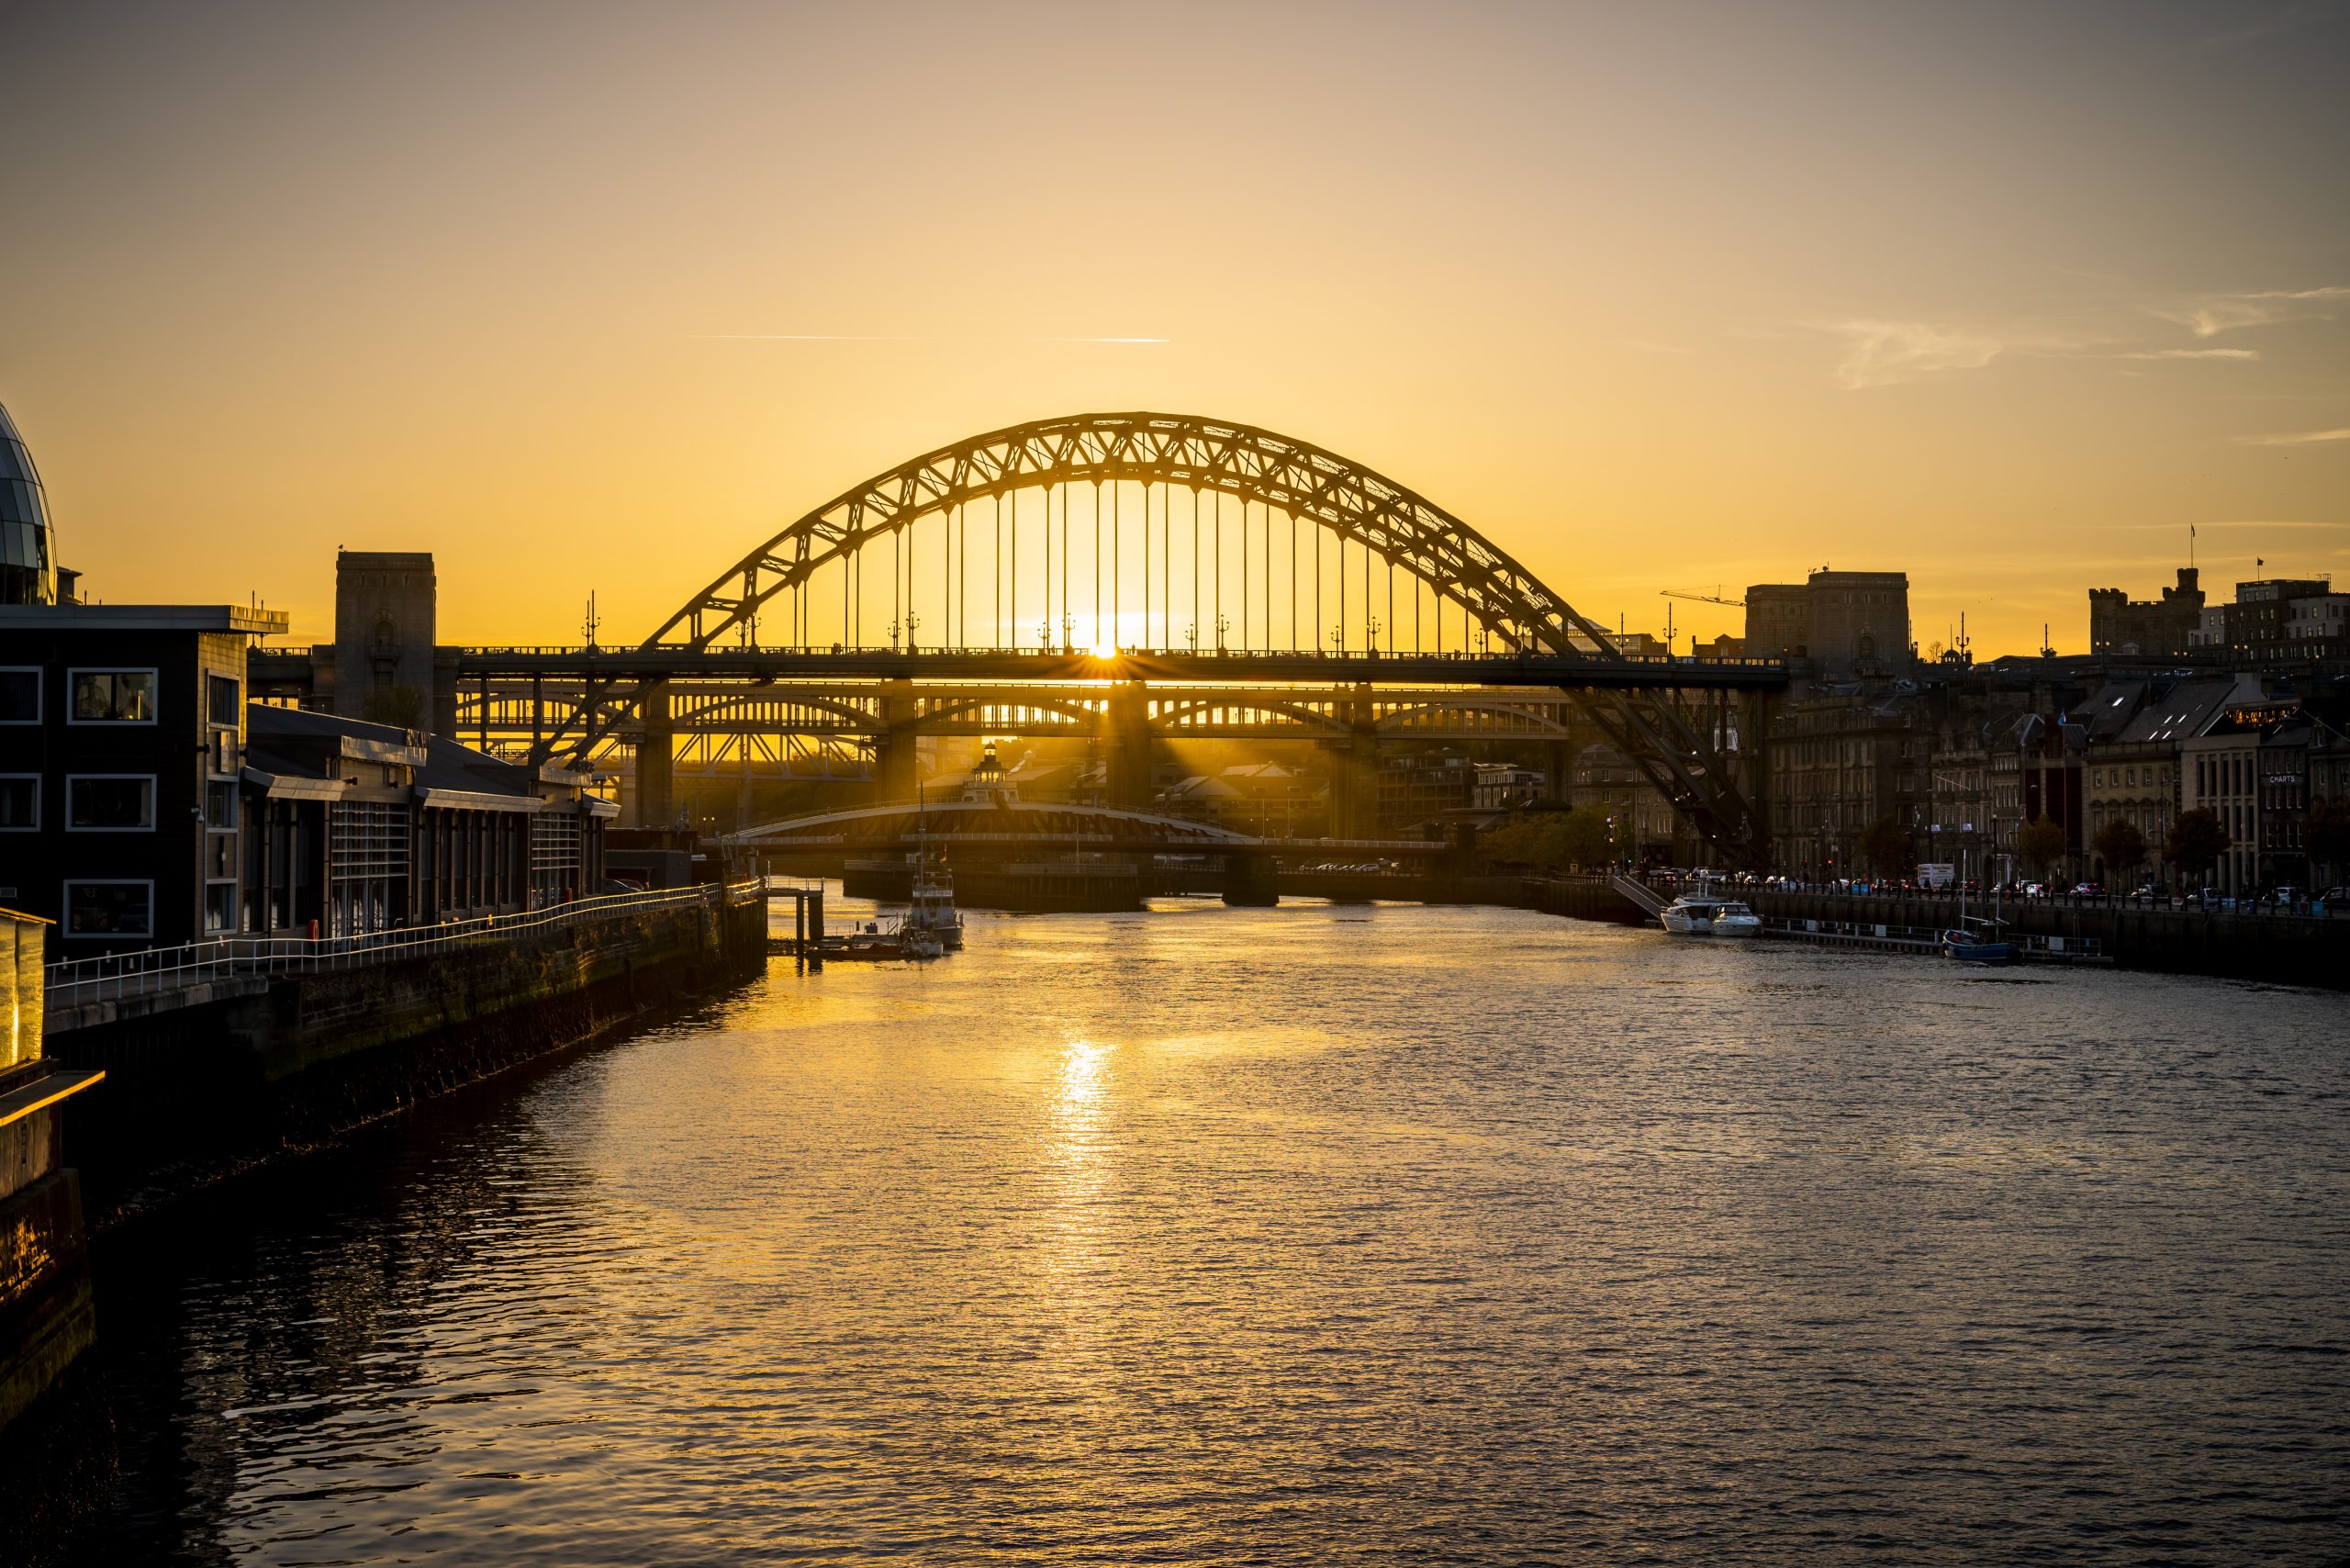 River Tyne at sunset with the Tyne Bridge in the centre of the image.